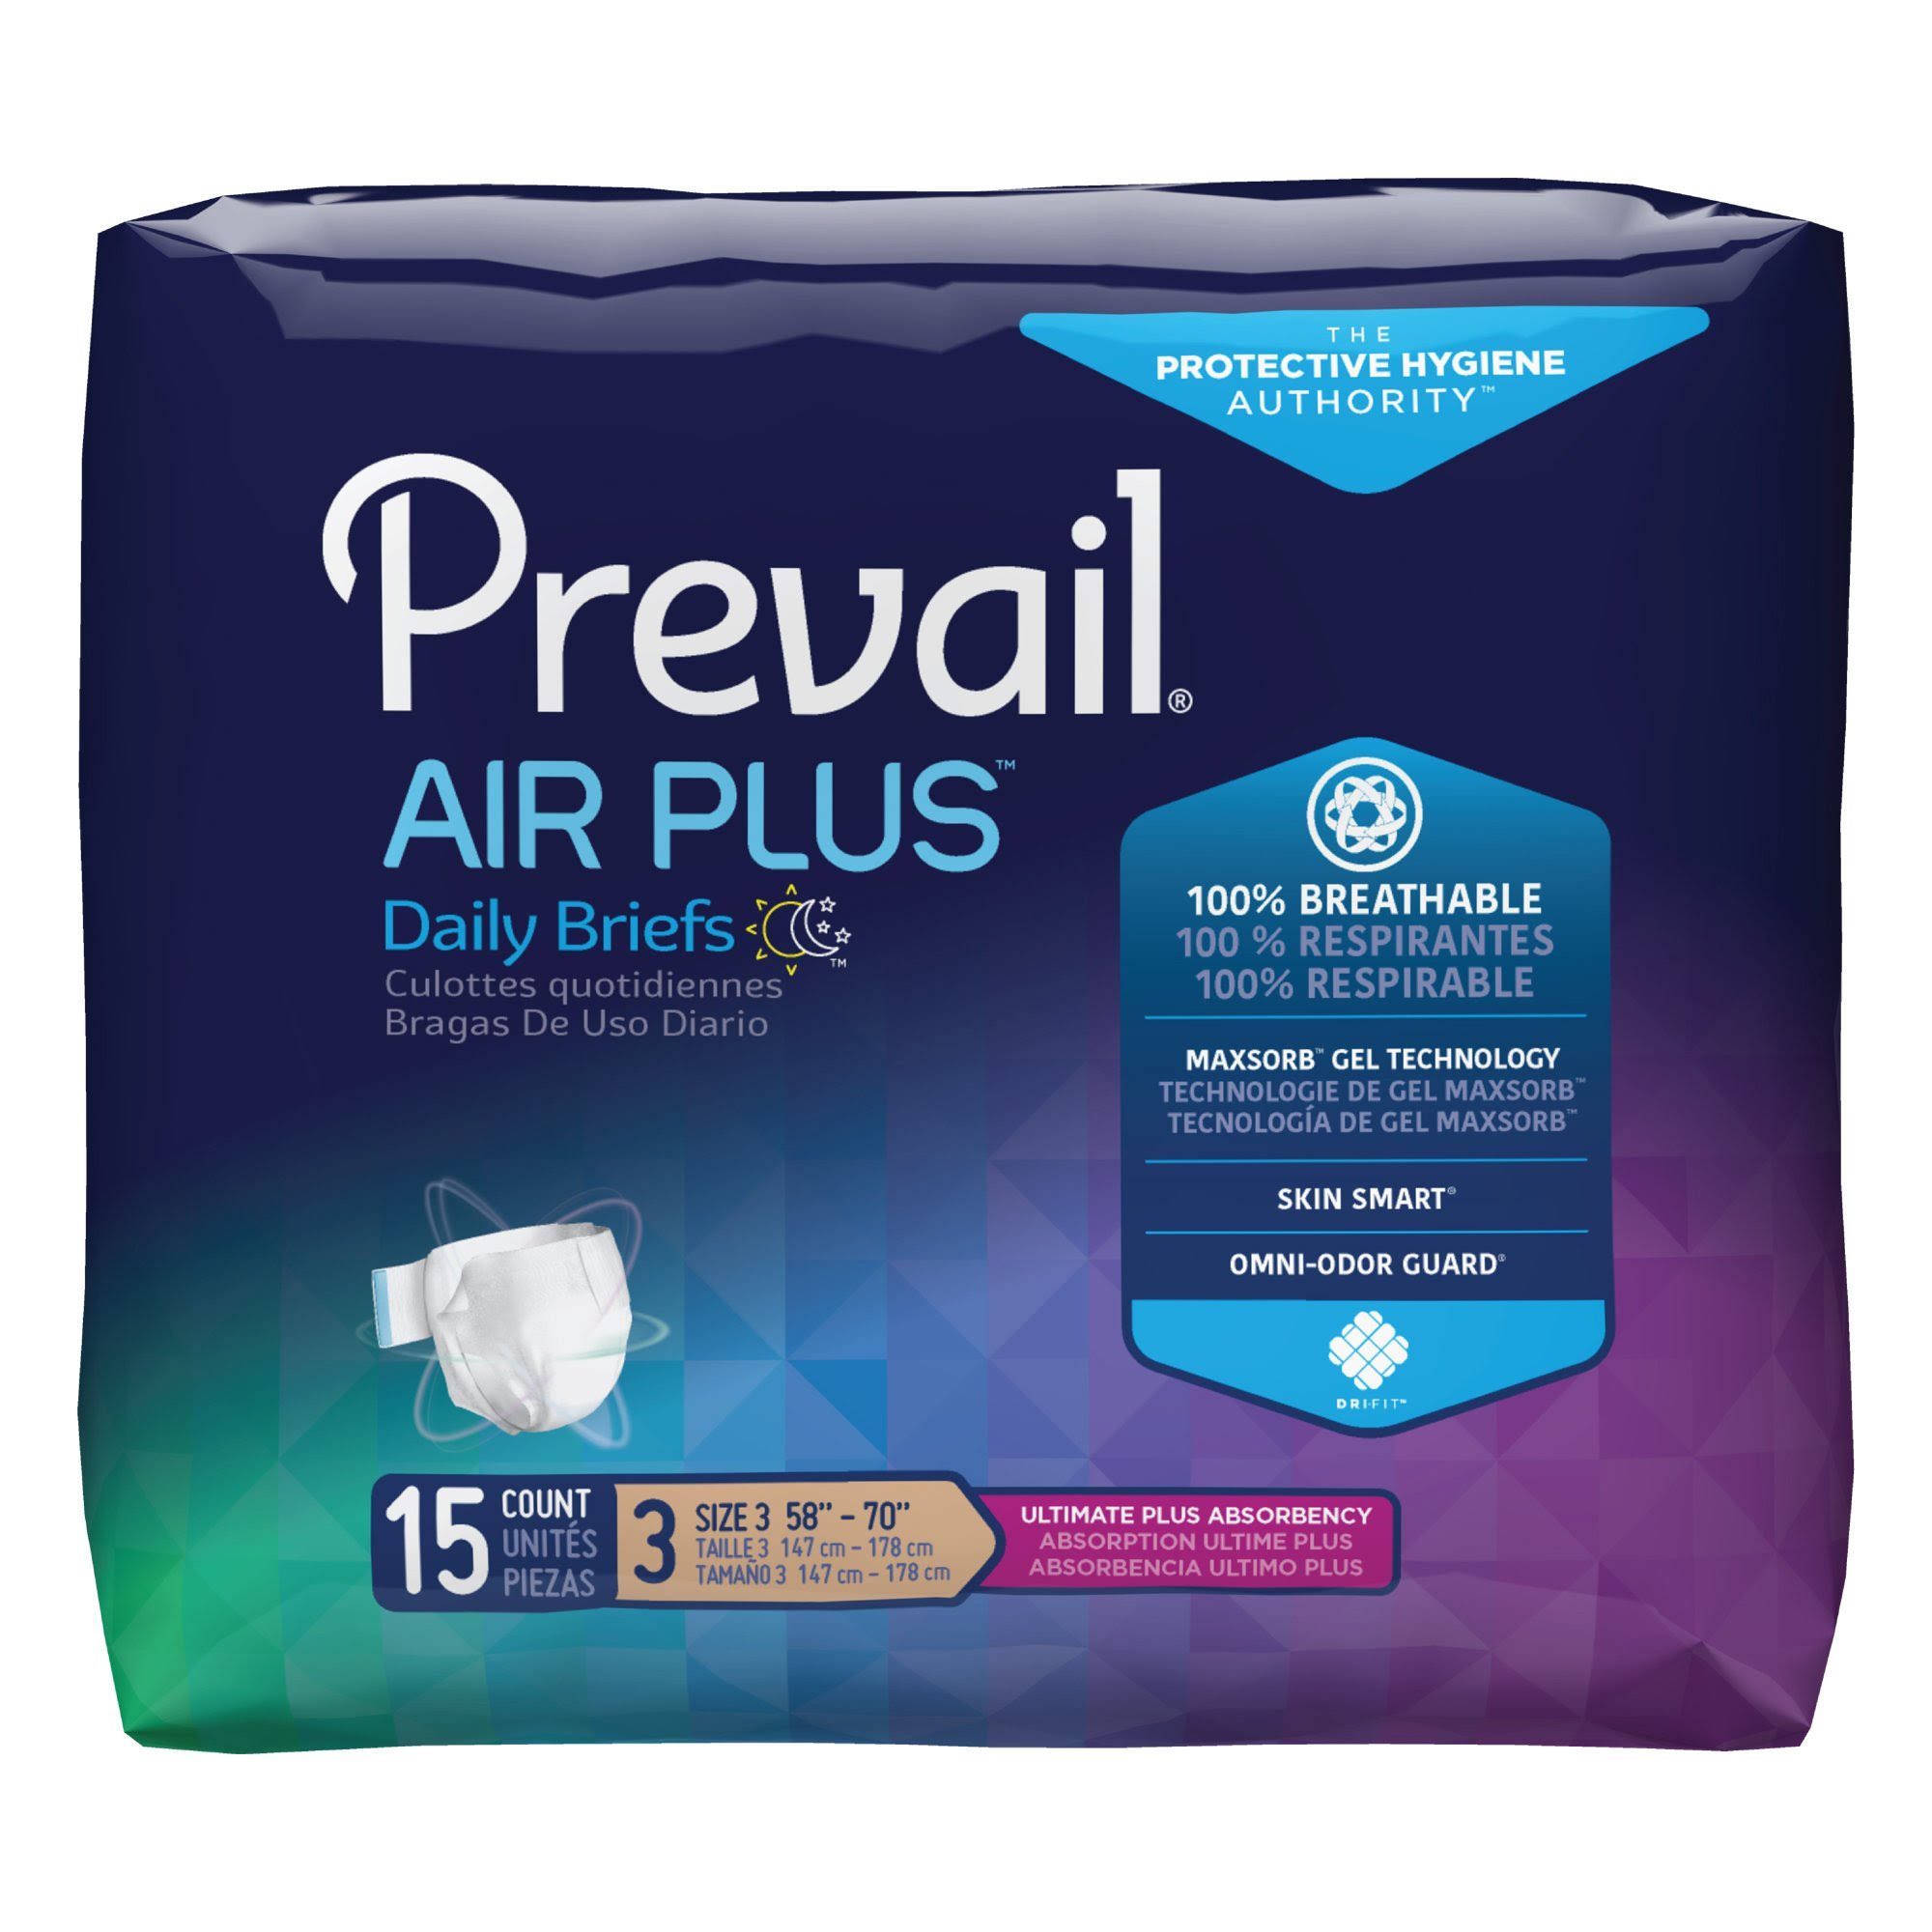 Prevail Unisex Breezers Absorbency Incontinence Briefs - Size 3, 15ct